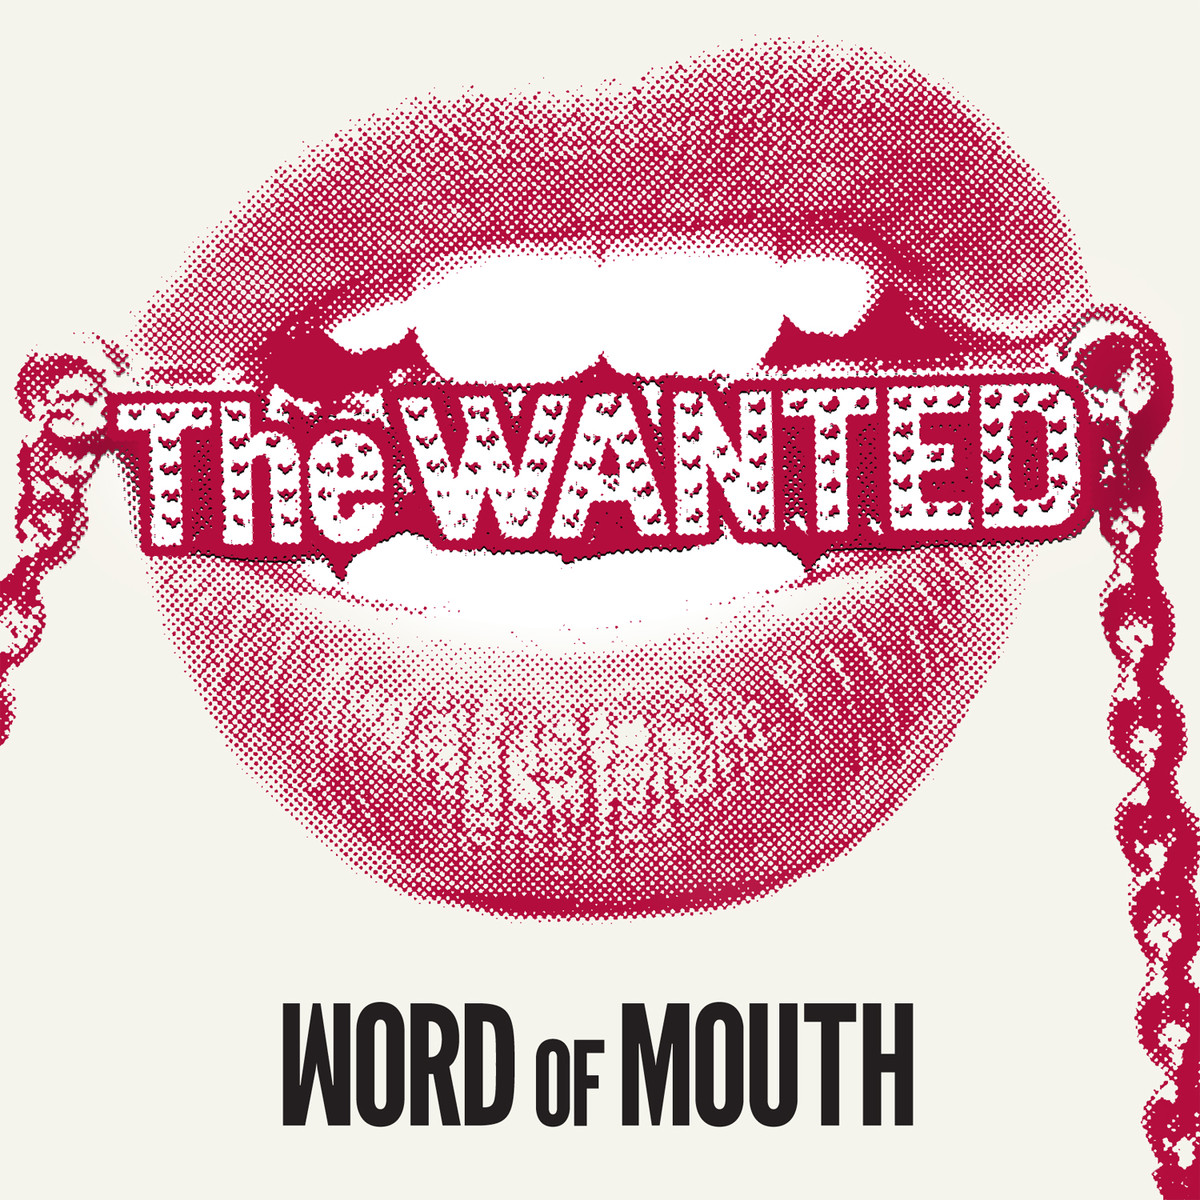 The Wanted – Could This Be Love